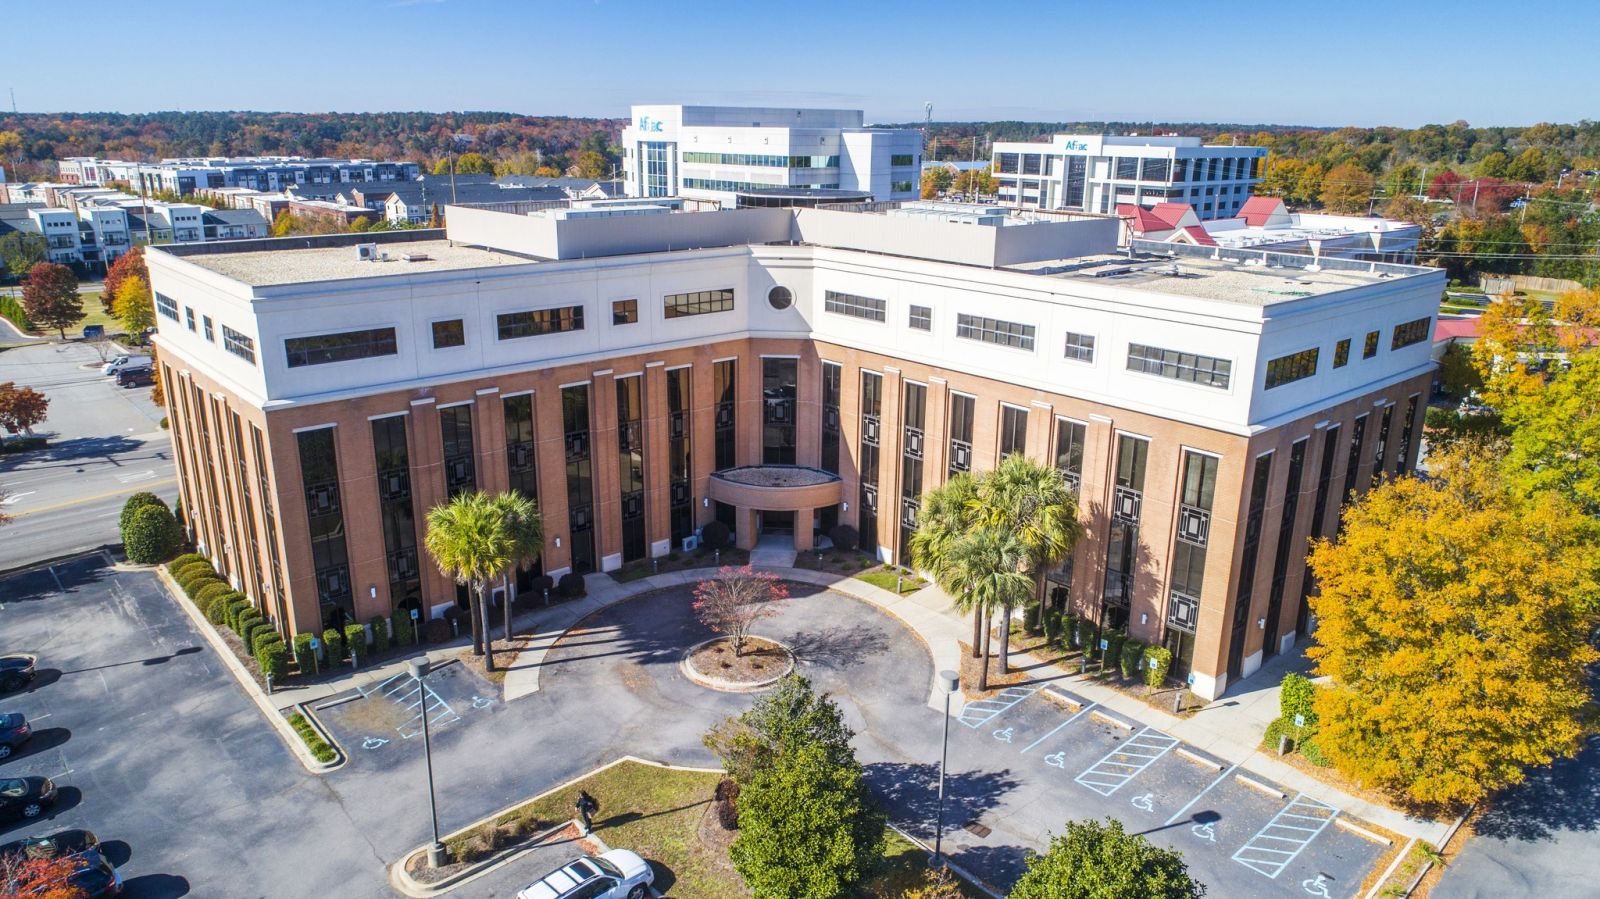 Greensboro, N.C.-based developer LDJ Global Strategies has acquired a 65,400-square-foot office building at 500 Taylor St. (Photo/Provided)